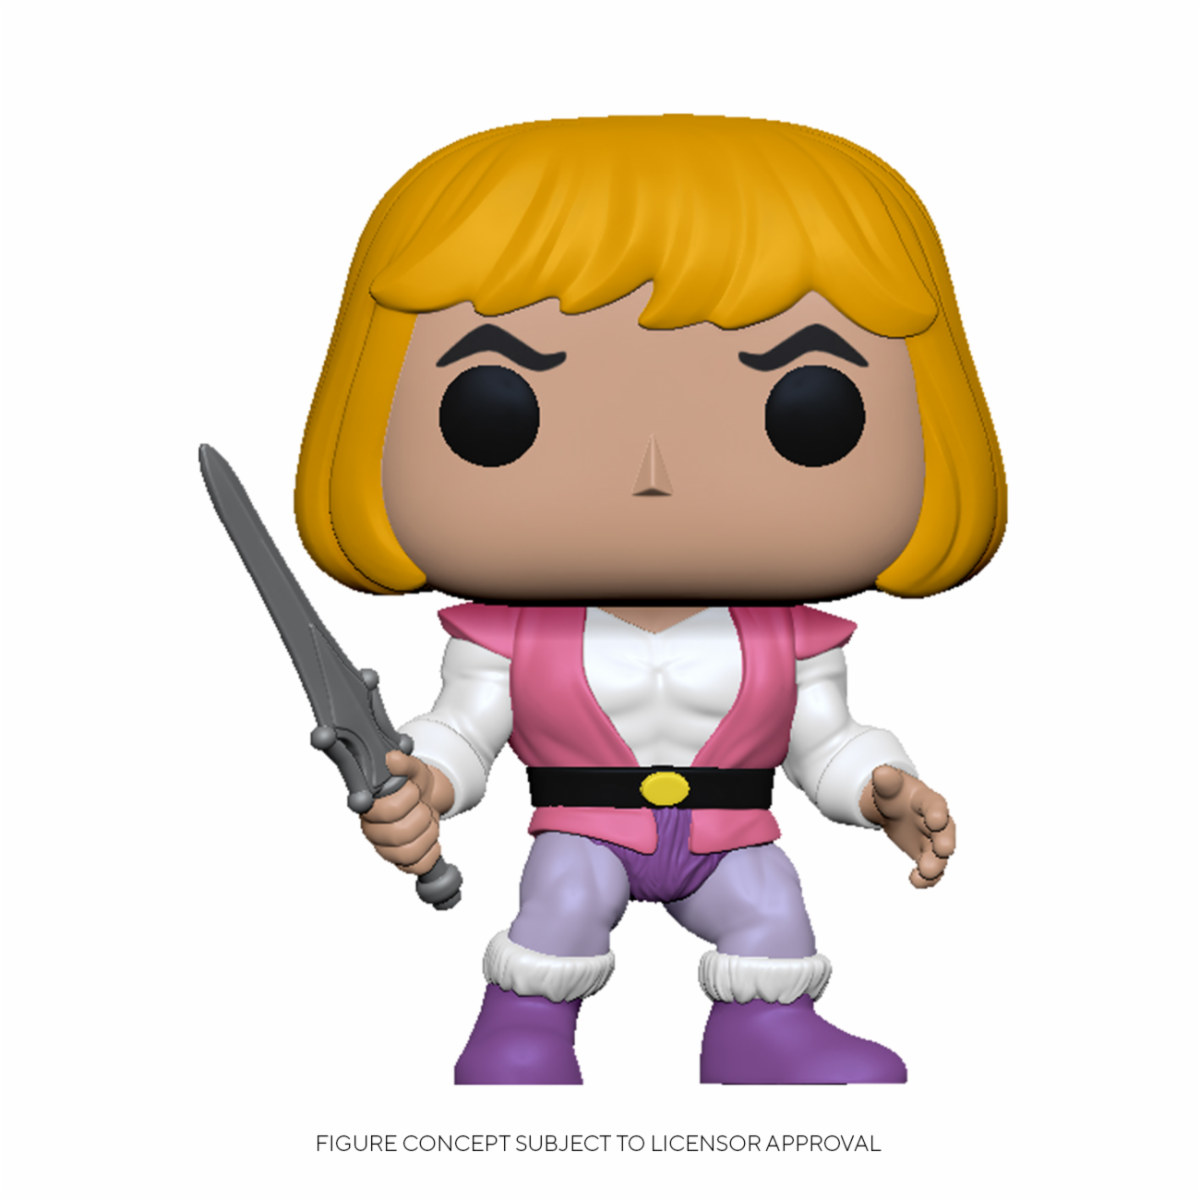 Funko Pop! Animation Masters of the Universe Prince Adam ENG Merchandising